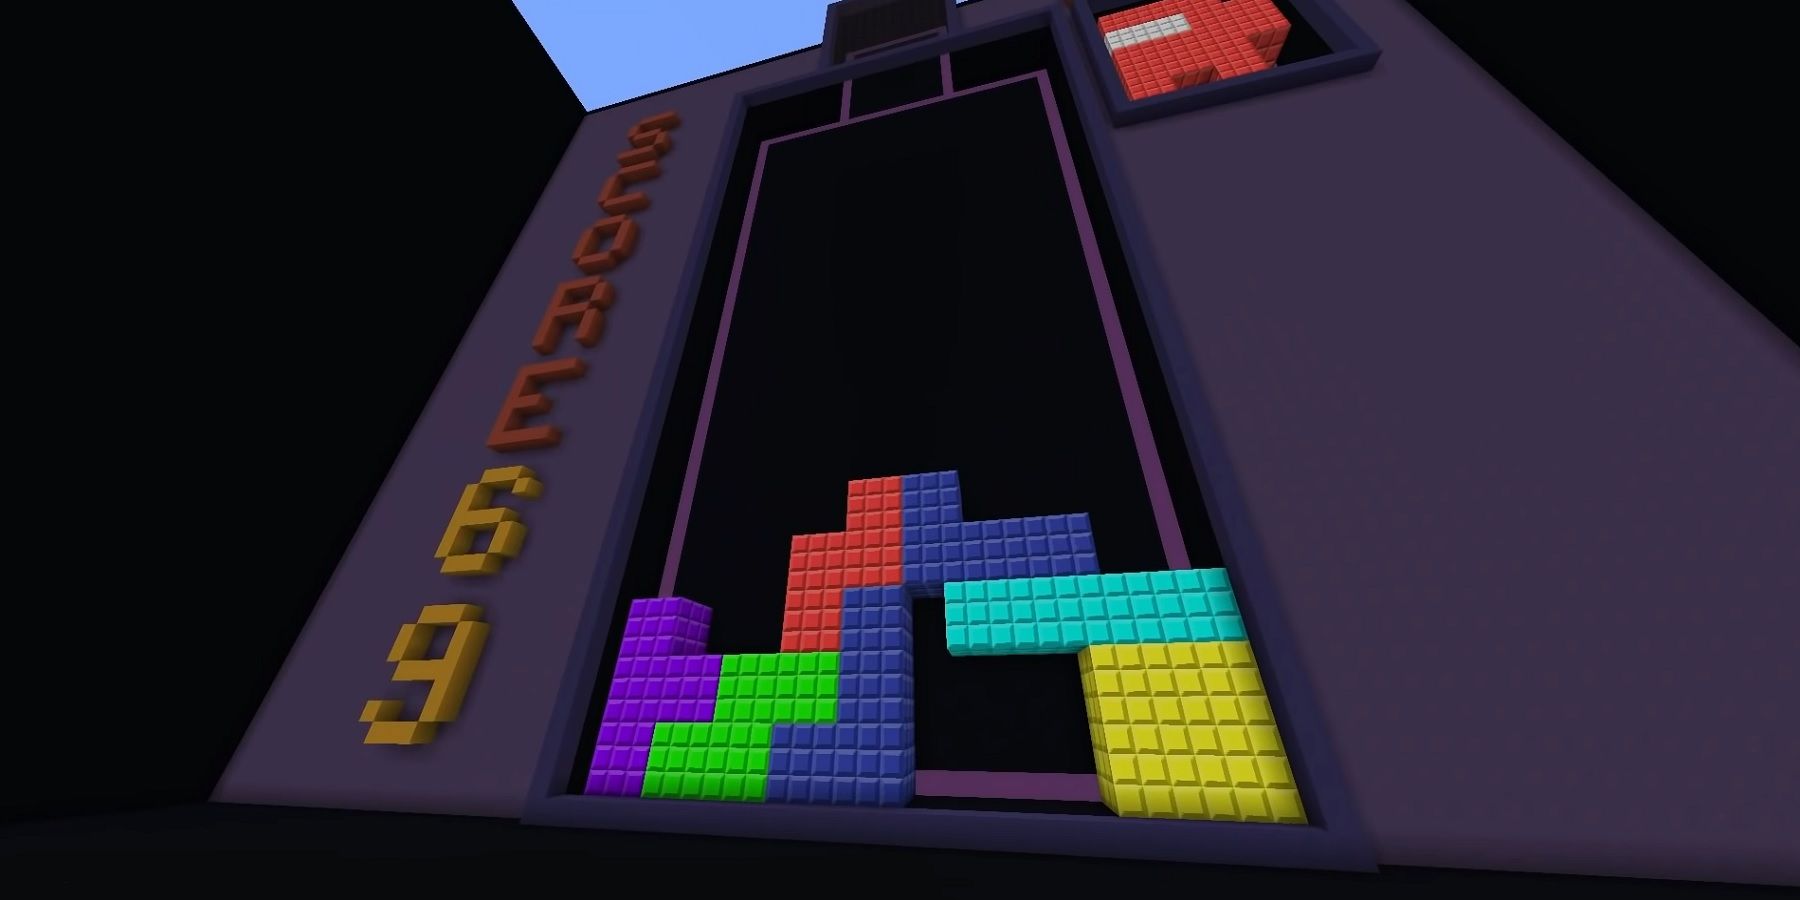 Screenshot from Minecraft showing a giant Tetris game.